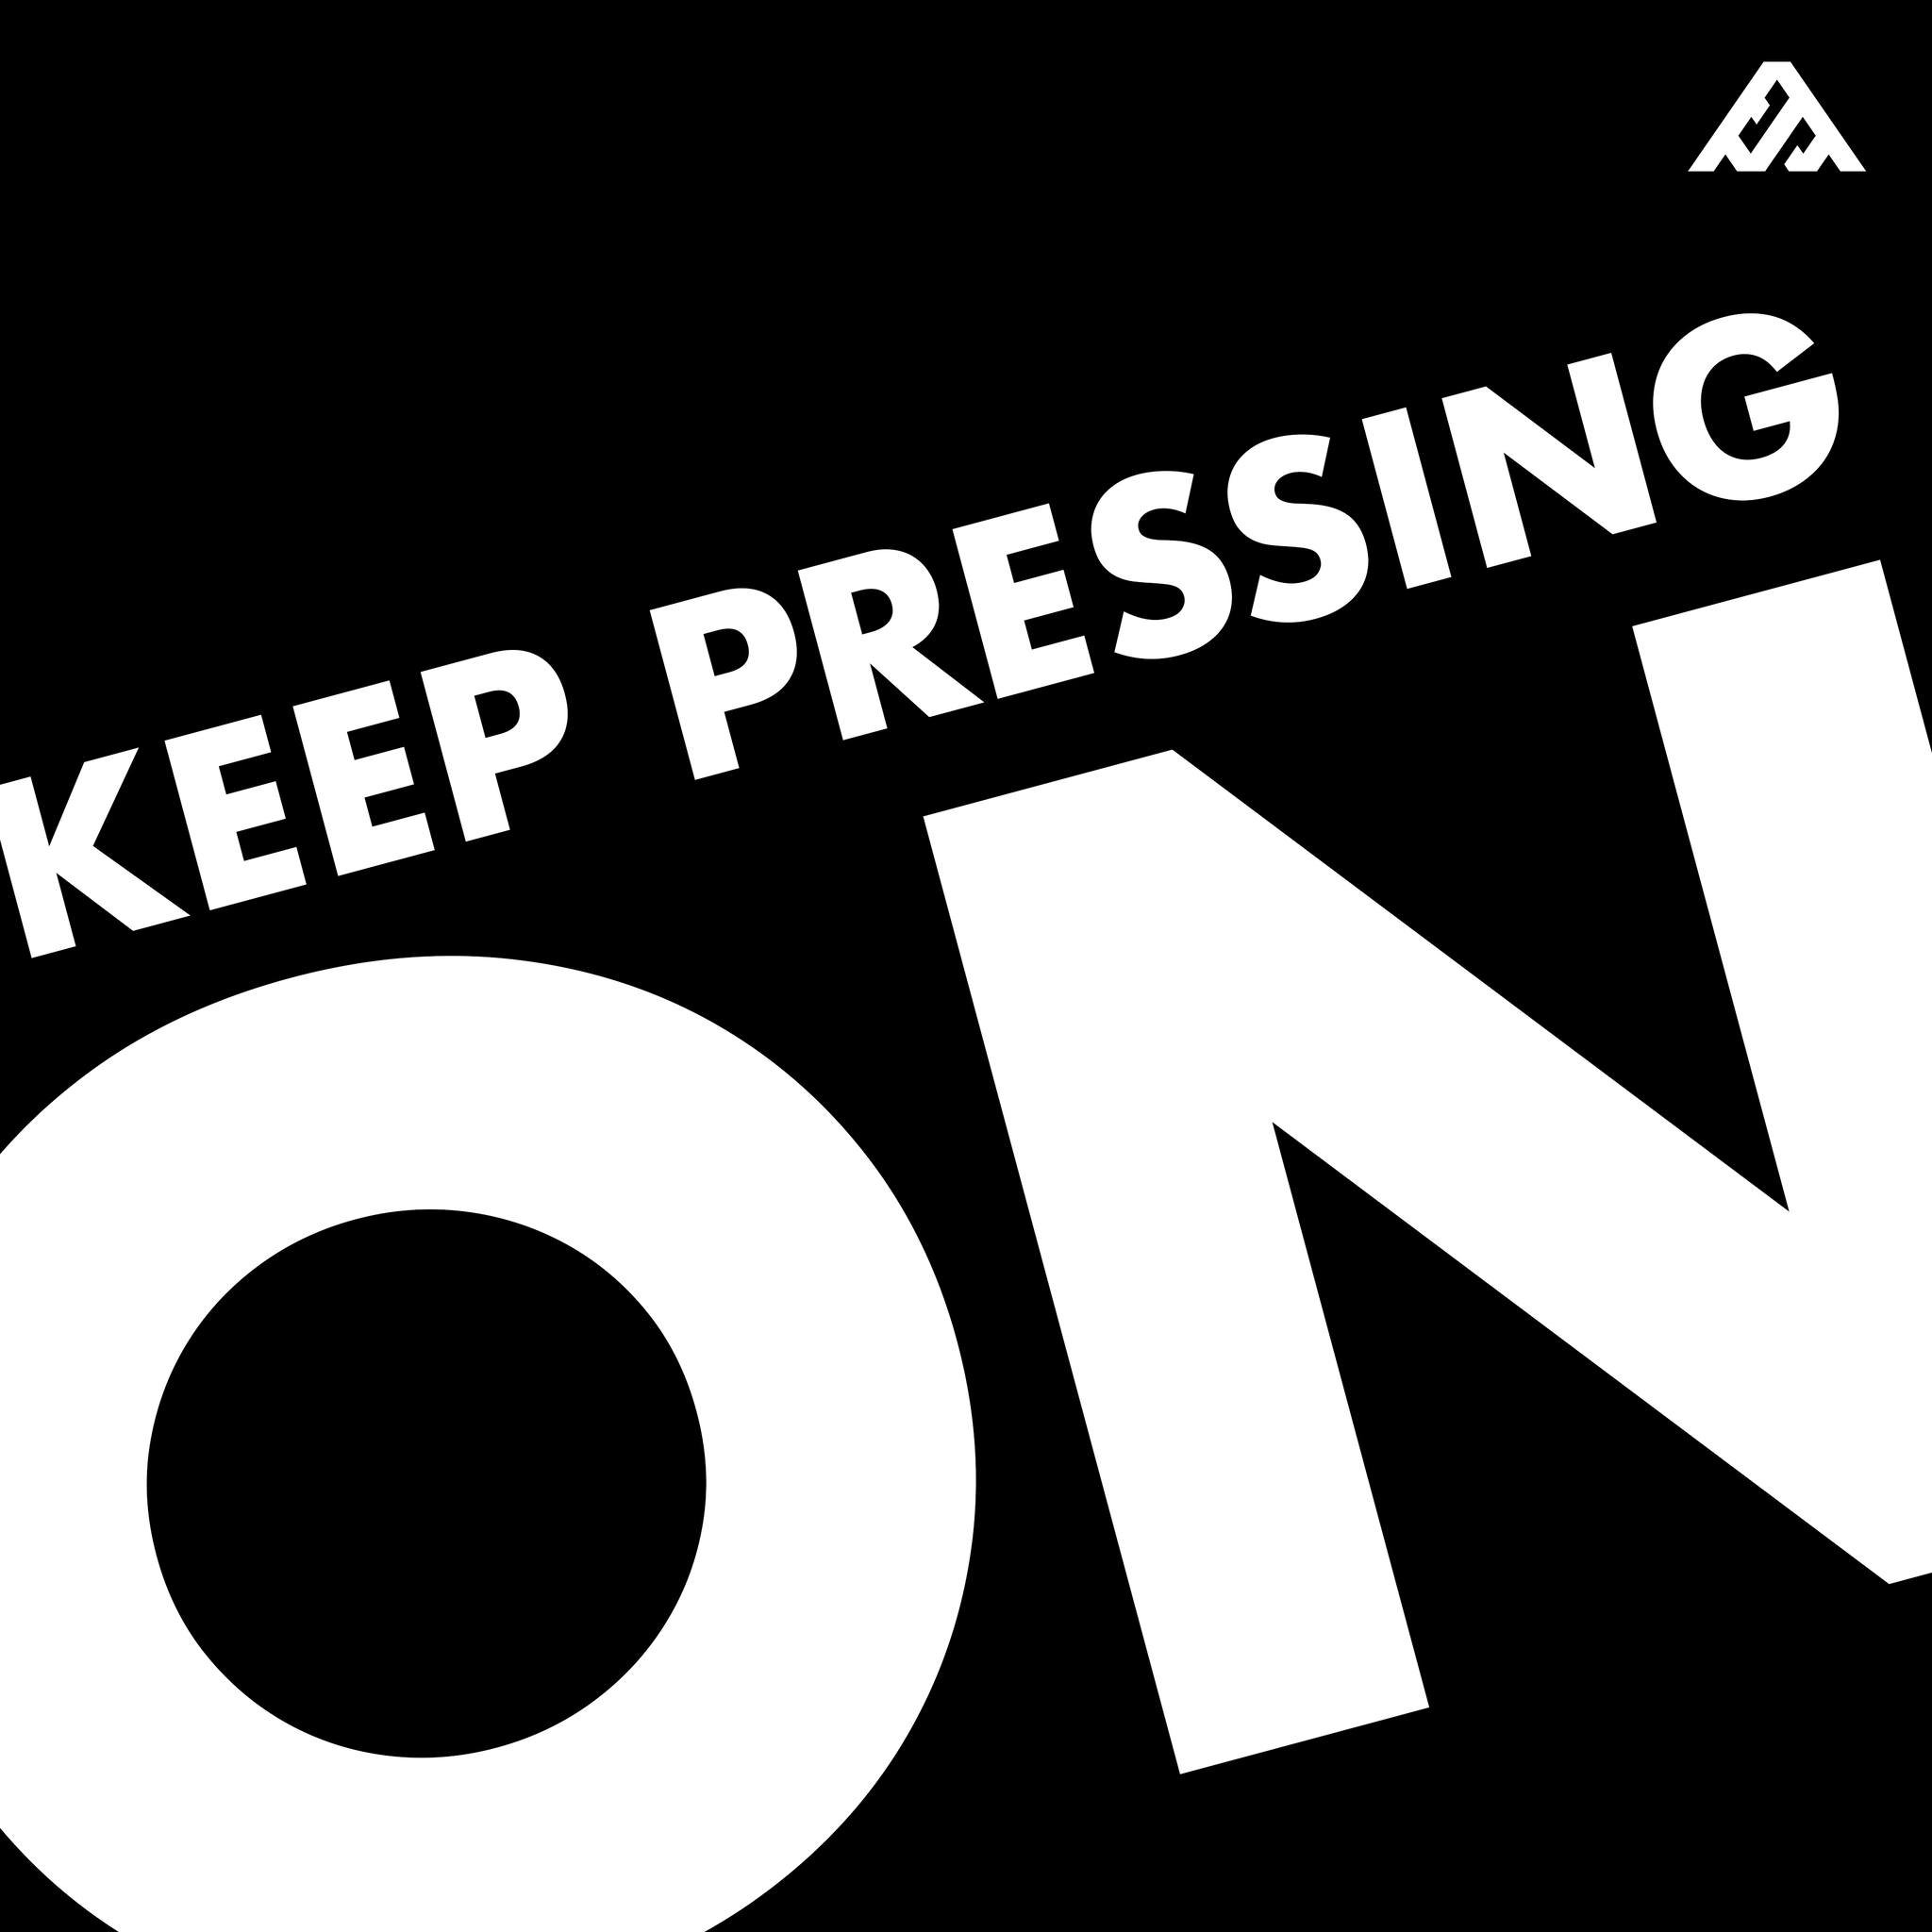 Keep Pressing On

The only way to make progress is to keep pressing on. Forget what lies behind. Press on.

www.allthingsbranding.com

#allthingsbranding #branded #brand #brands #brandphotography #websites #brandwebsites #branddesign #brandlogos #bra